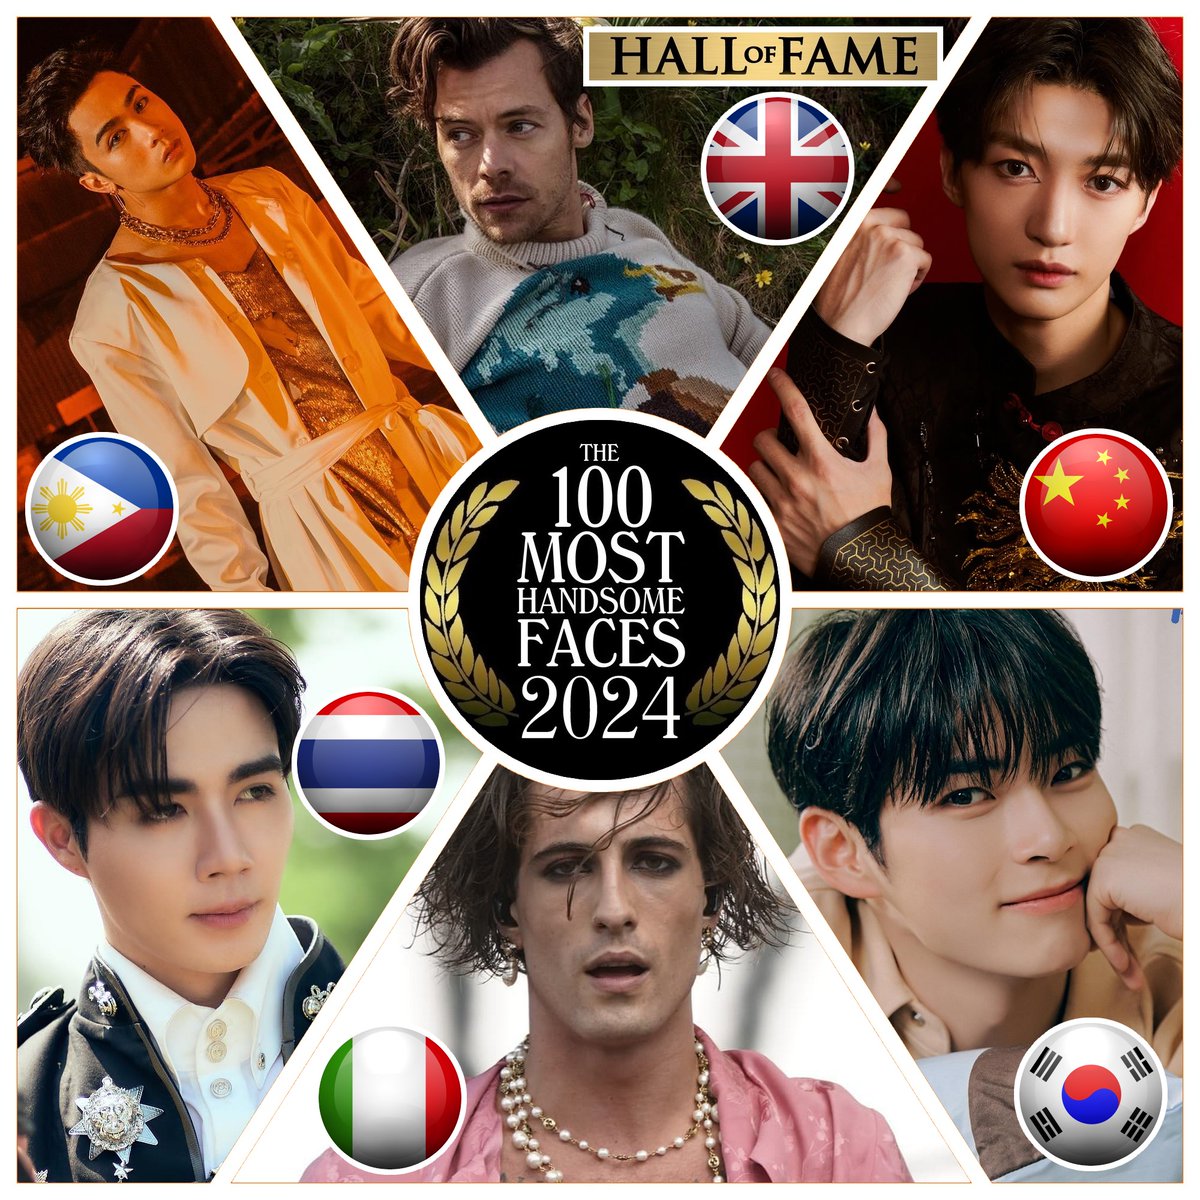 Which Face Should Be Nominated? These are the faces nominated today. Nominate & Vote for the Top 100 of 2024 -patreon.com/tccandler #tccandler #100faces2024 #JOSHCULLEN #SB19 #SB19_JOSH #HarryStyles #liangshiyu #loong9 #zeepruk #maneskin #hanbin #ZB1 #ZEROBASEONE